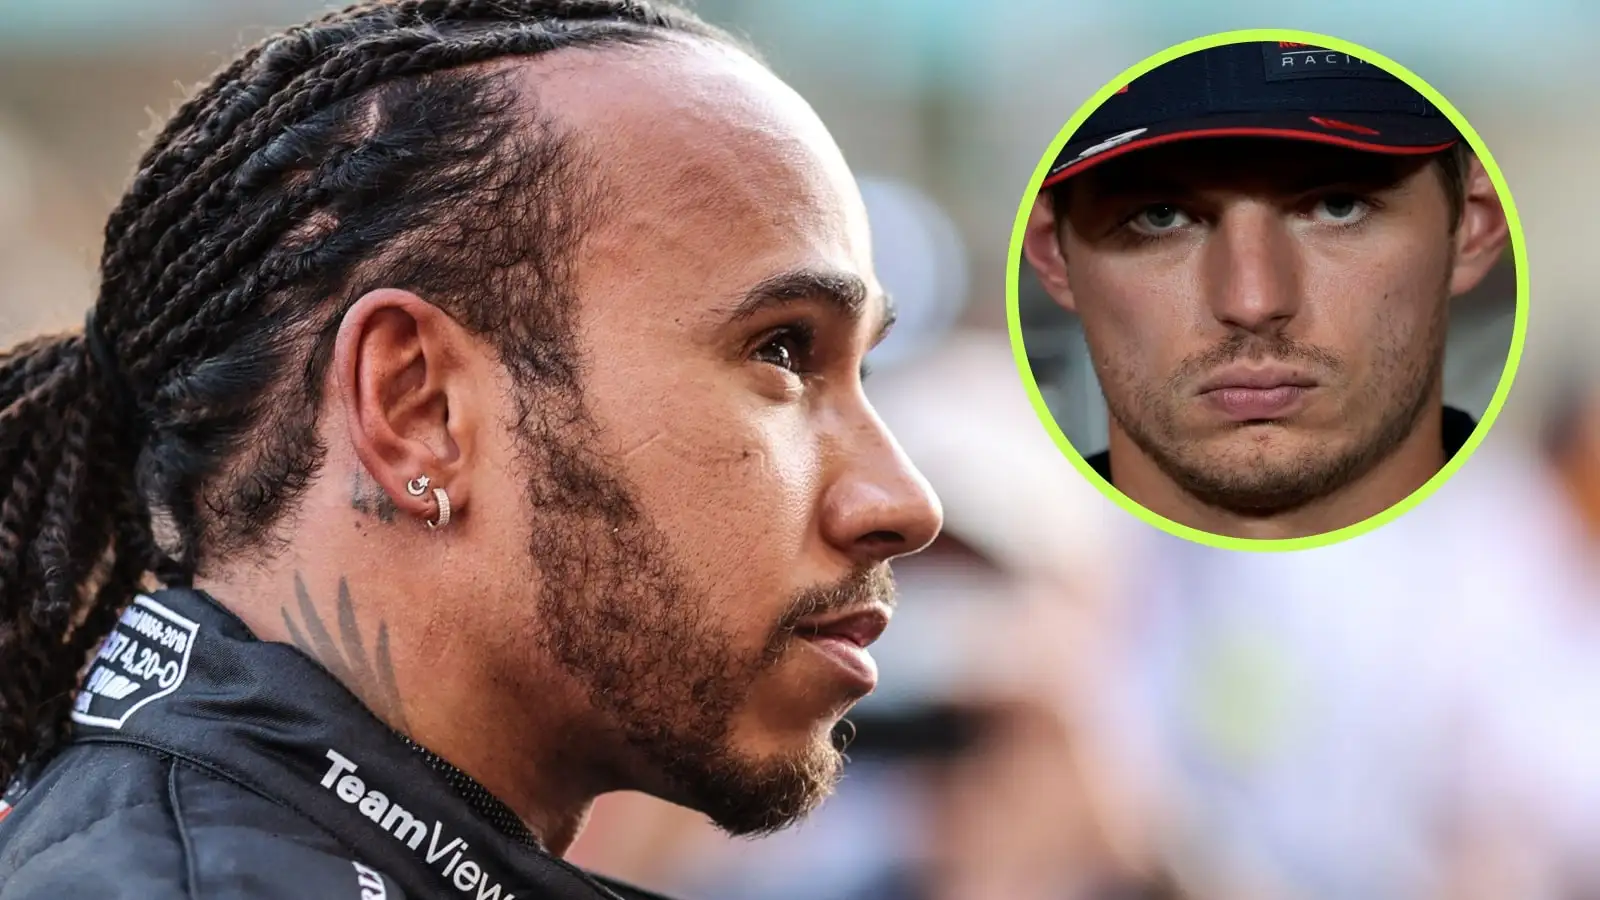 Lewis Hamilton looking contemplative on the grid at Abu Dhabi 2021 with a menacing-looking Max Verstappen in a small circle